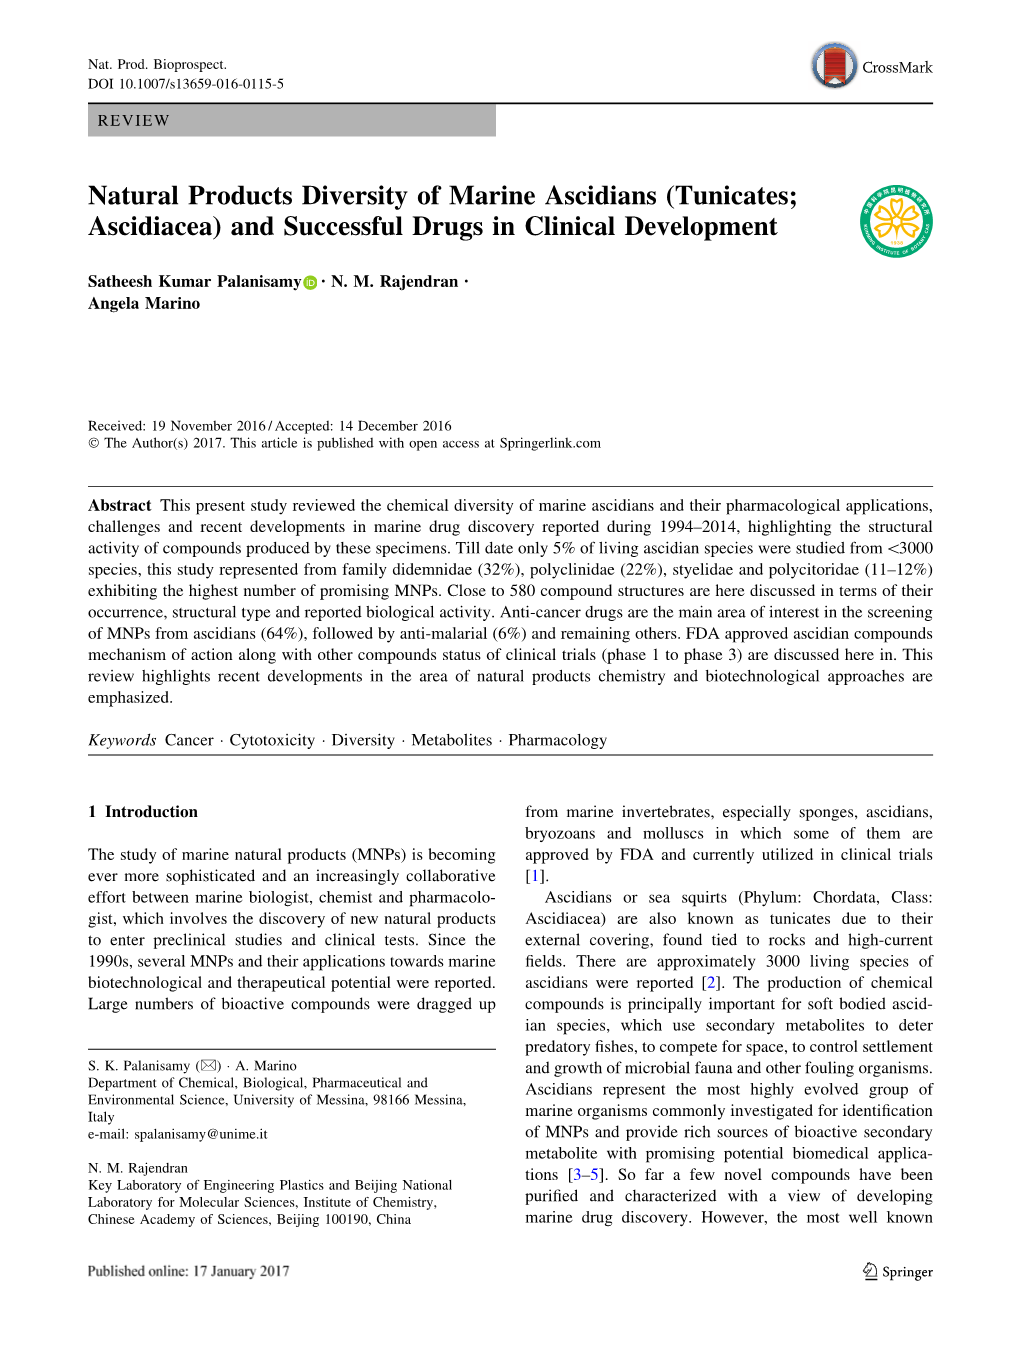 Natural Products Diversity of Marine Ascidians (Tunicates; Ascidiacea) and Successful Drugs in Clinical Development